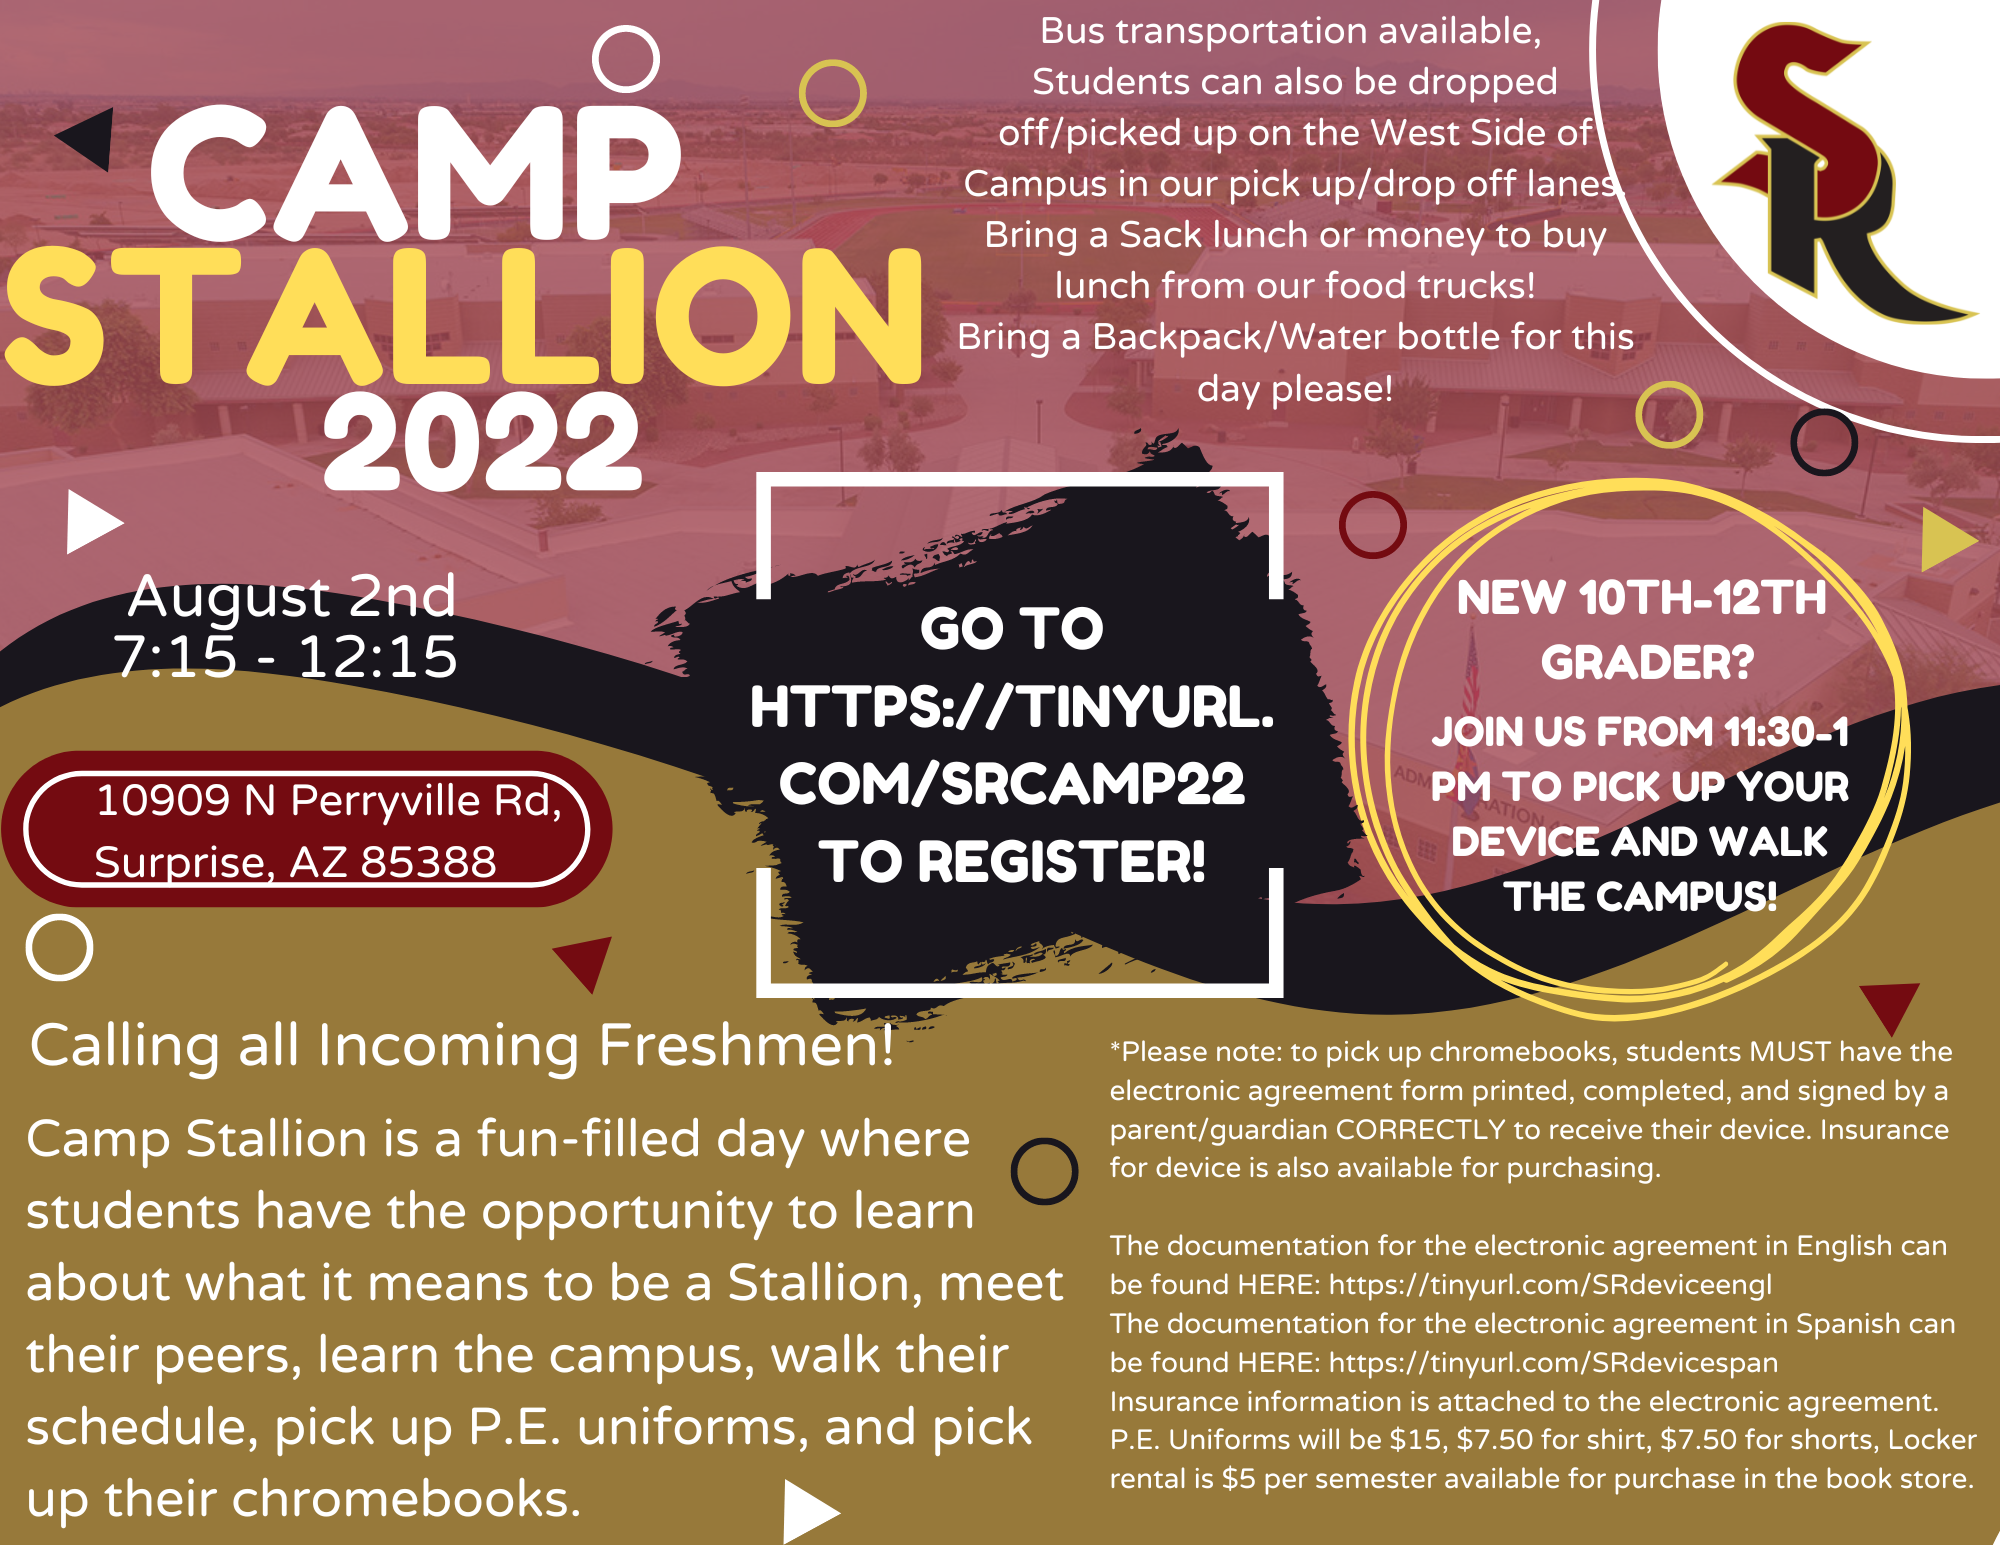 Flyer with several colors describing what to expect at Camp Stallion